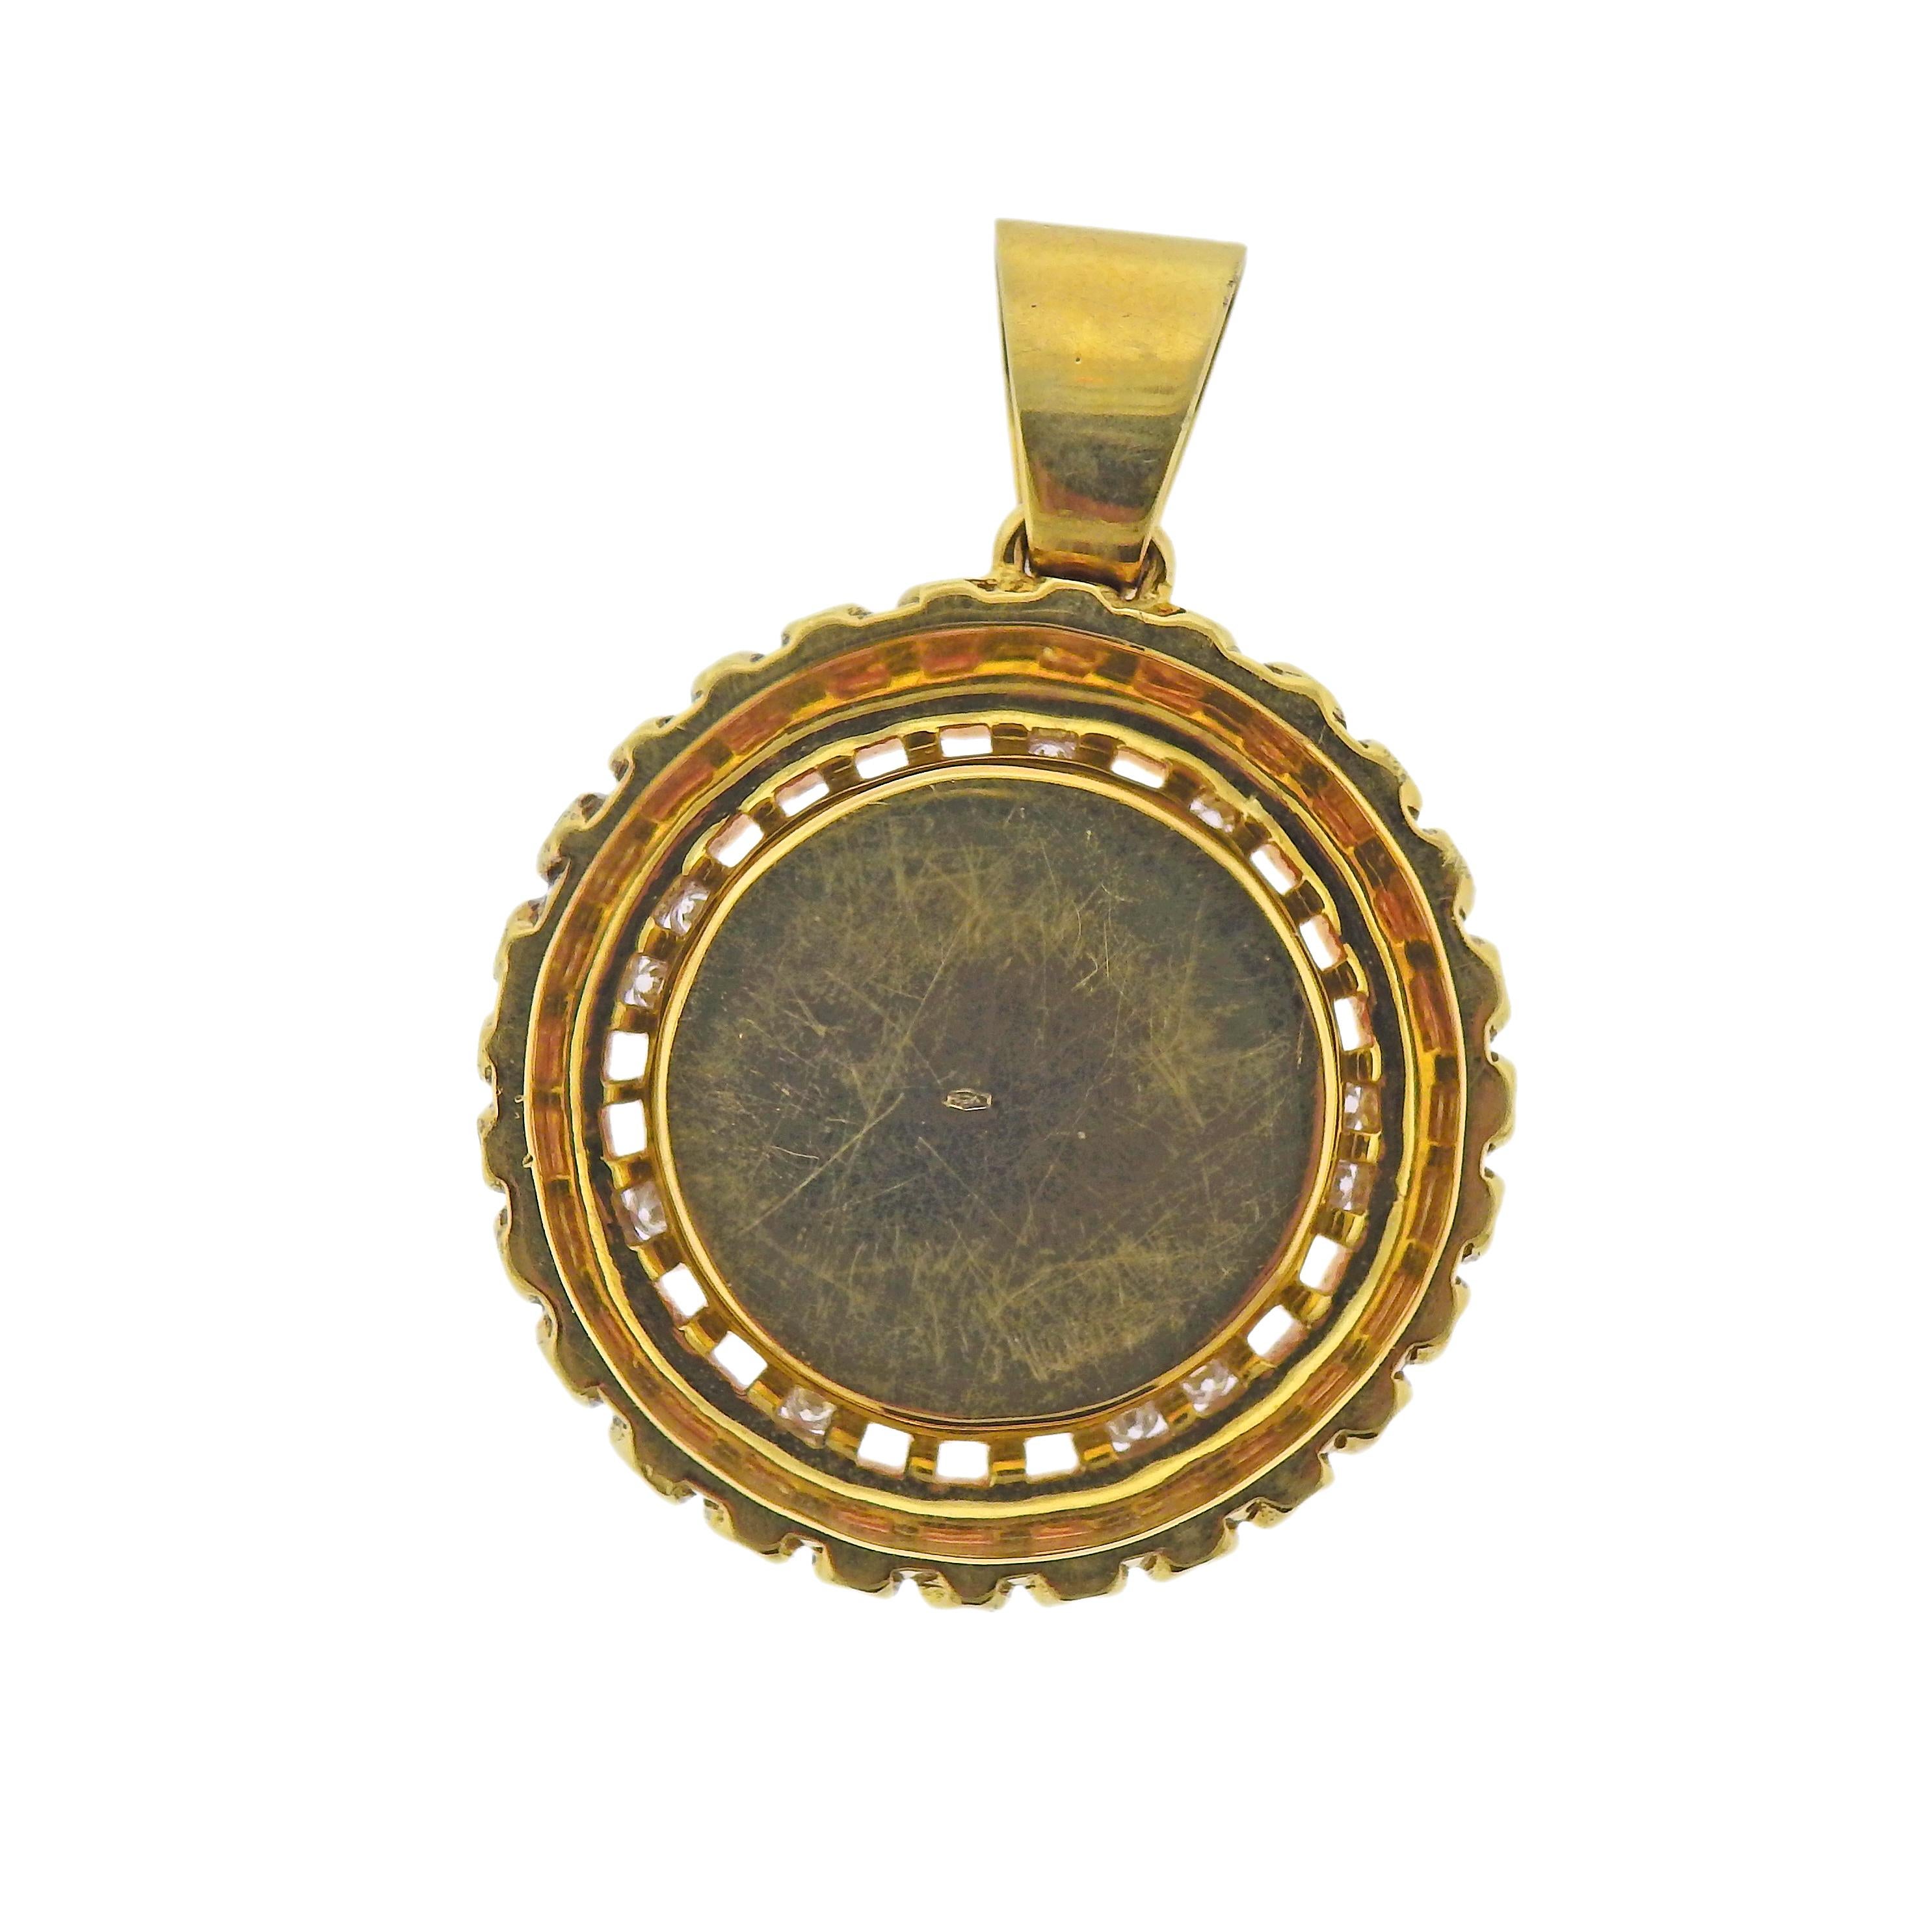 18k gold pendant with carved coral Sun, surrounded with approx. 0.30ctw in diamonds. Pendant is 35mm in diameter and 50mm long with bale. Marked 750. Weight - 28.3 grams.